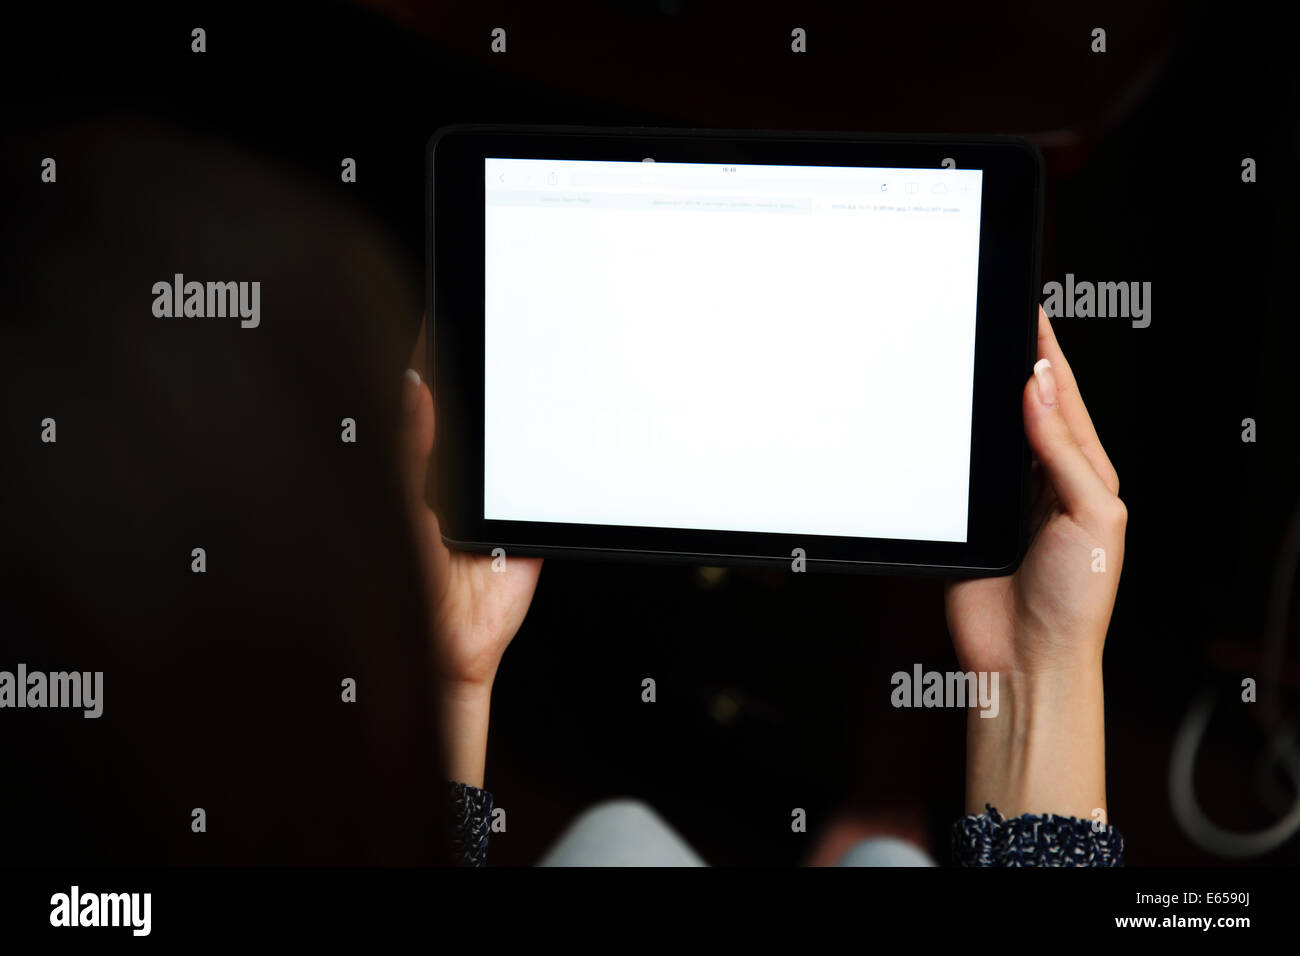 Back view portrait of a woman holding tablet computer Stock Photo